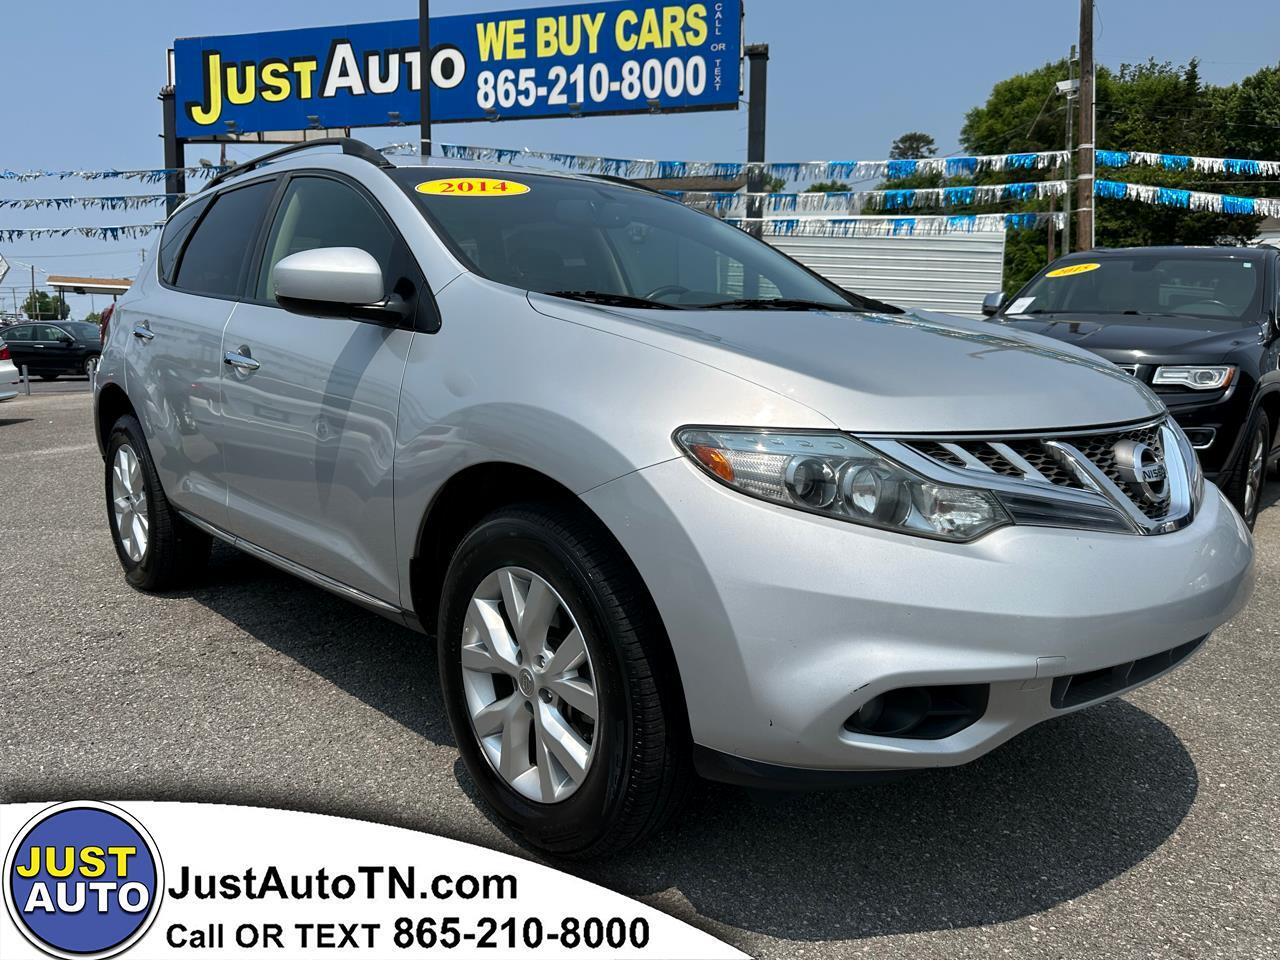 Nissan Murano FWD 4dr LE 2014